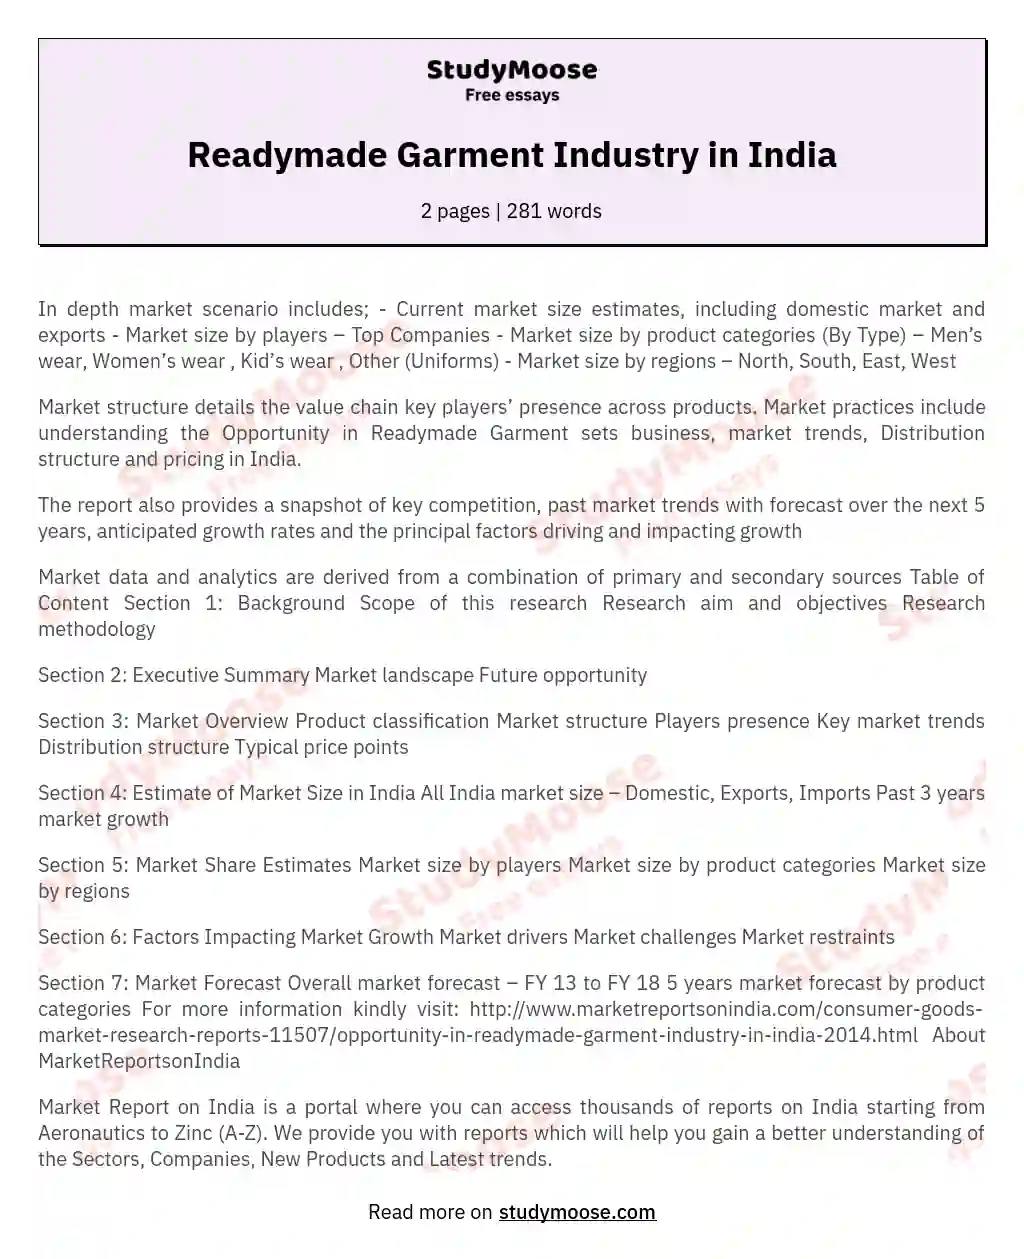 Readymade Garment Industry in India essay